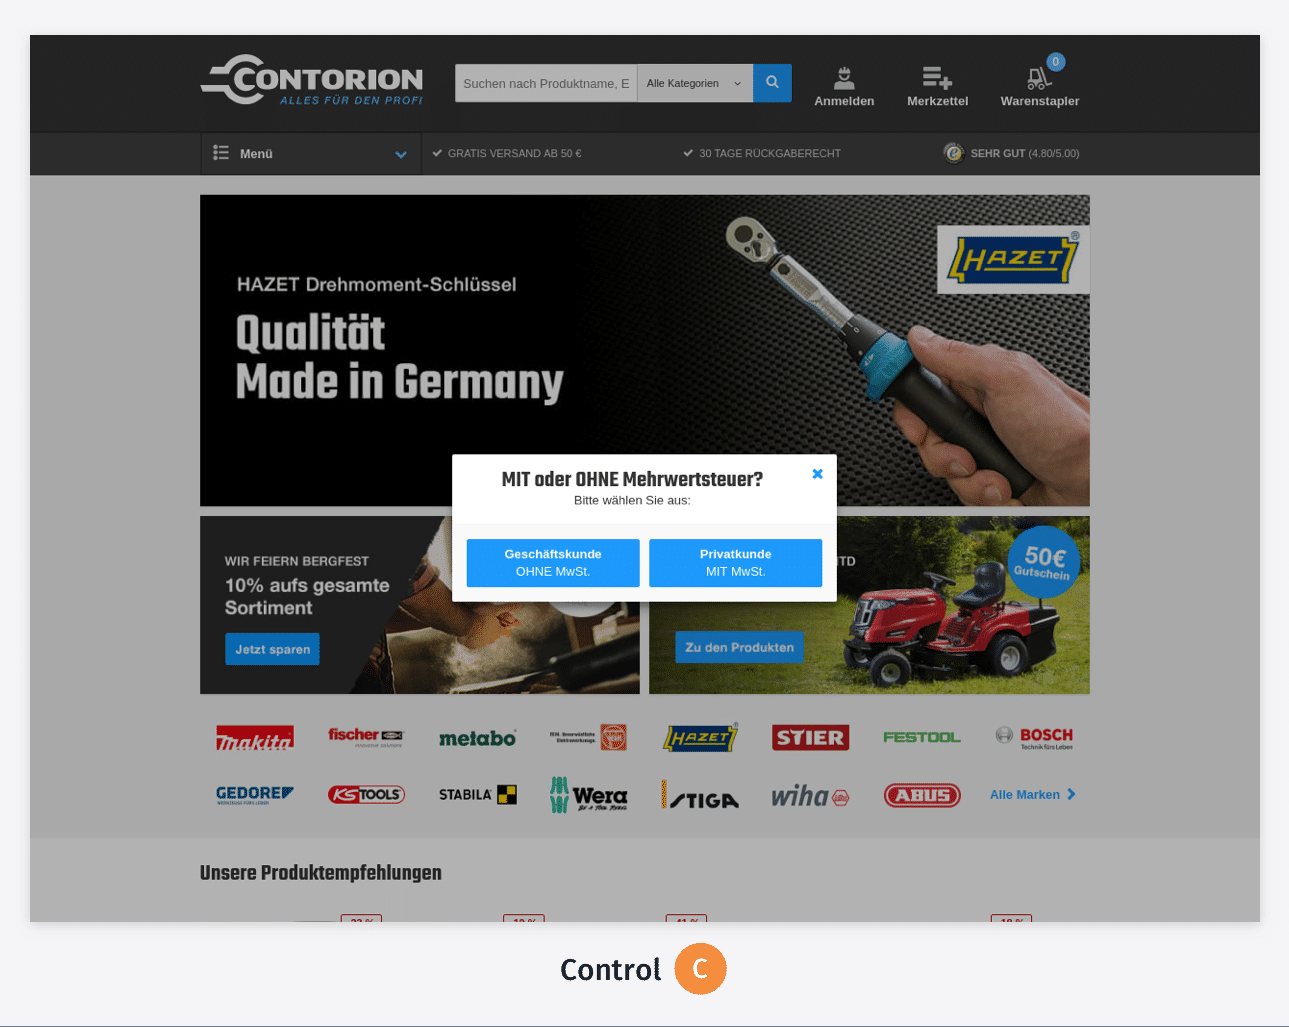 Control of the Test 1 on Contorion website